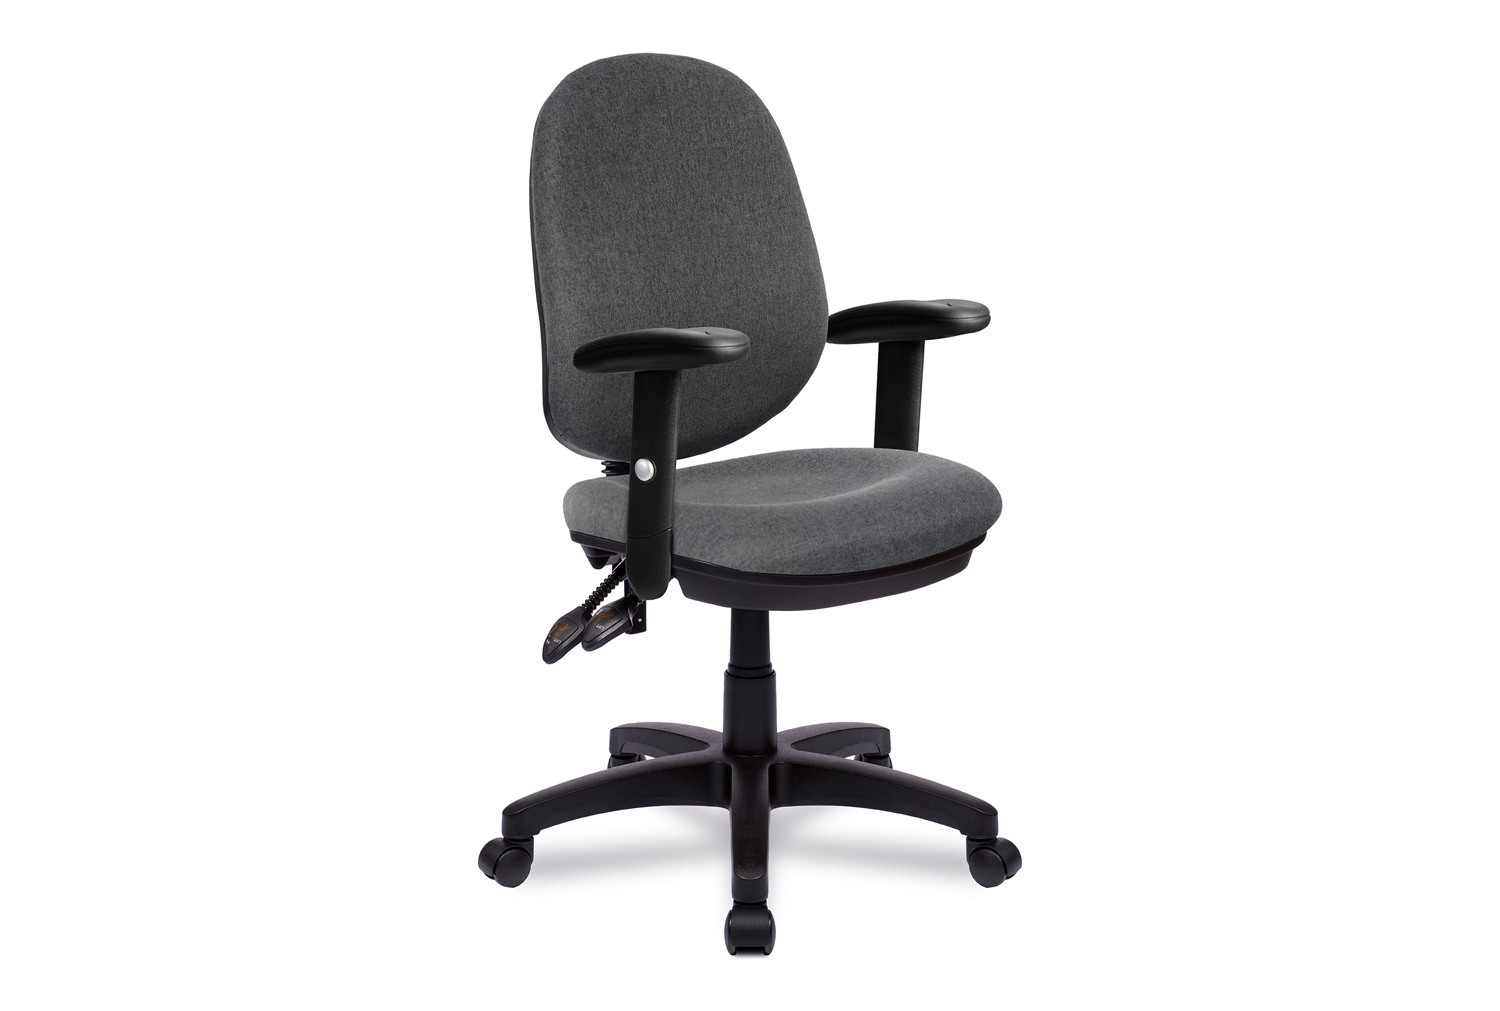 Mineo 3 Lever Operator Office Chair With Adjustable Arms, Grey, Fully Installed